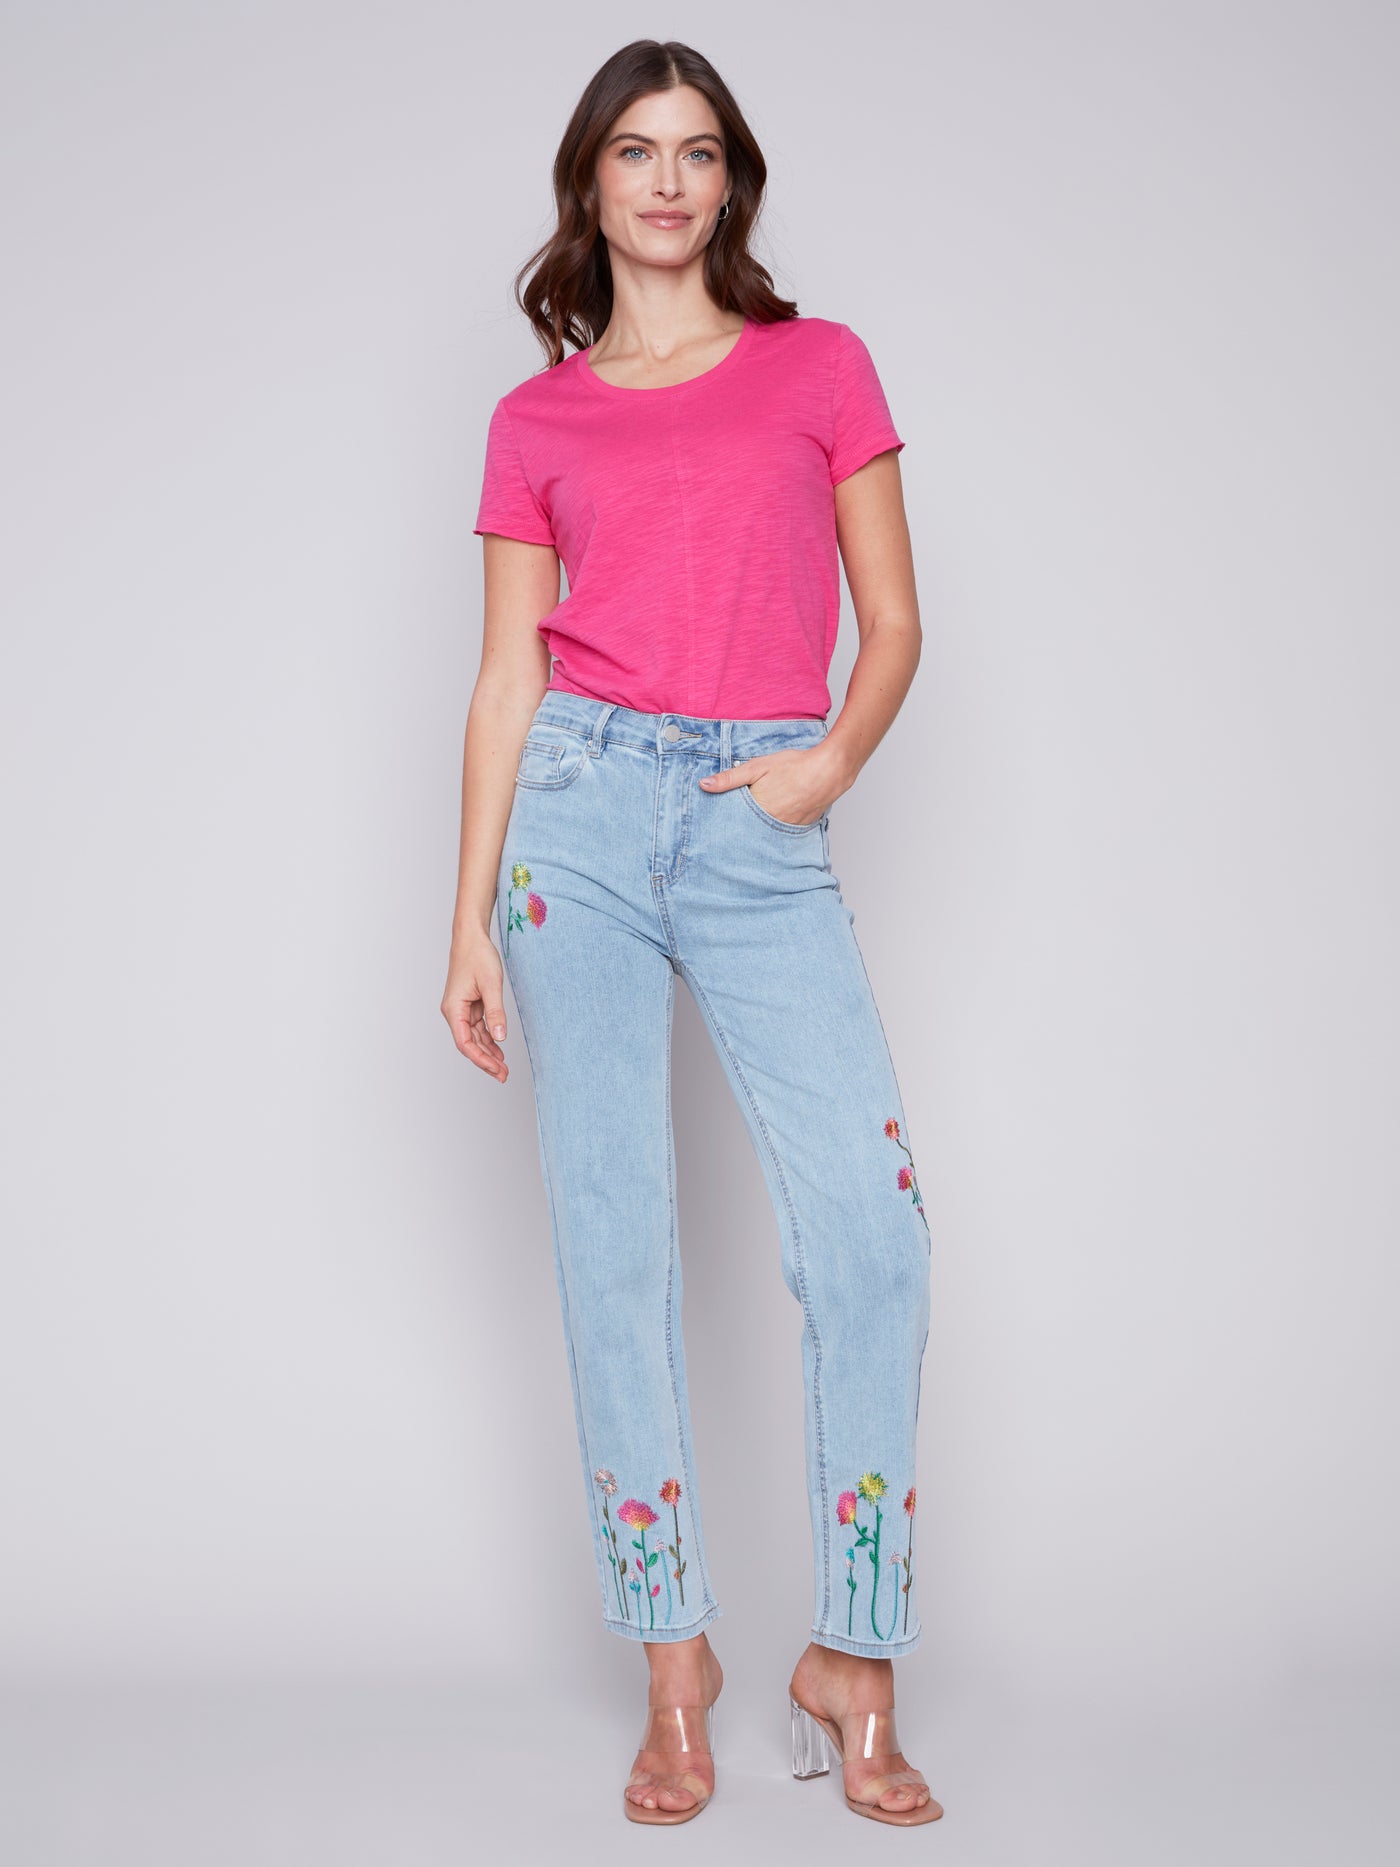 Bleach Blue Floral Embroidered Jean